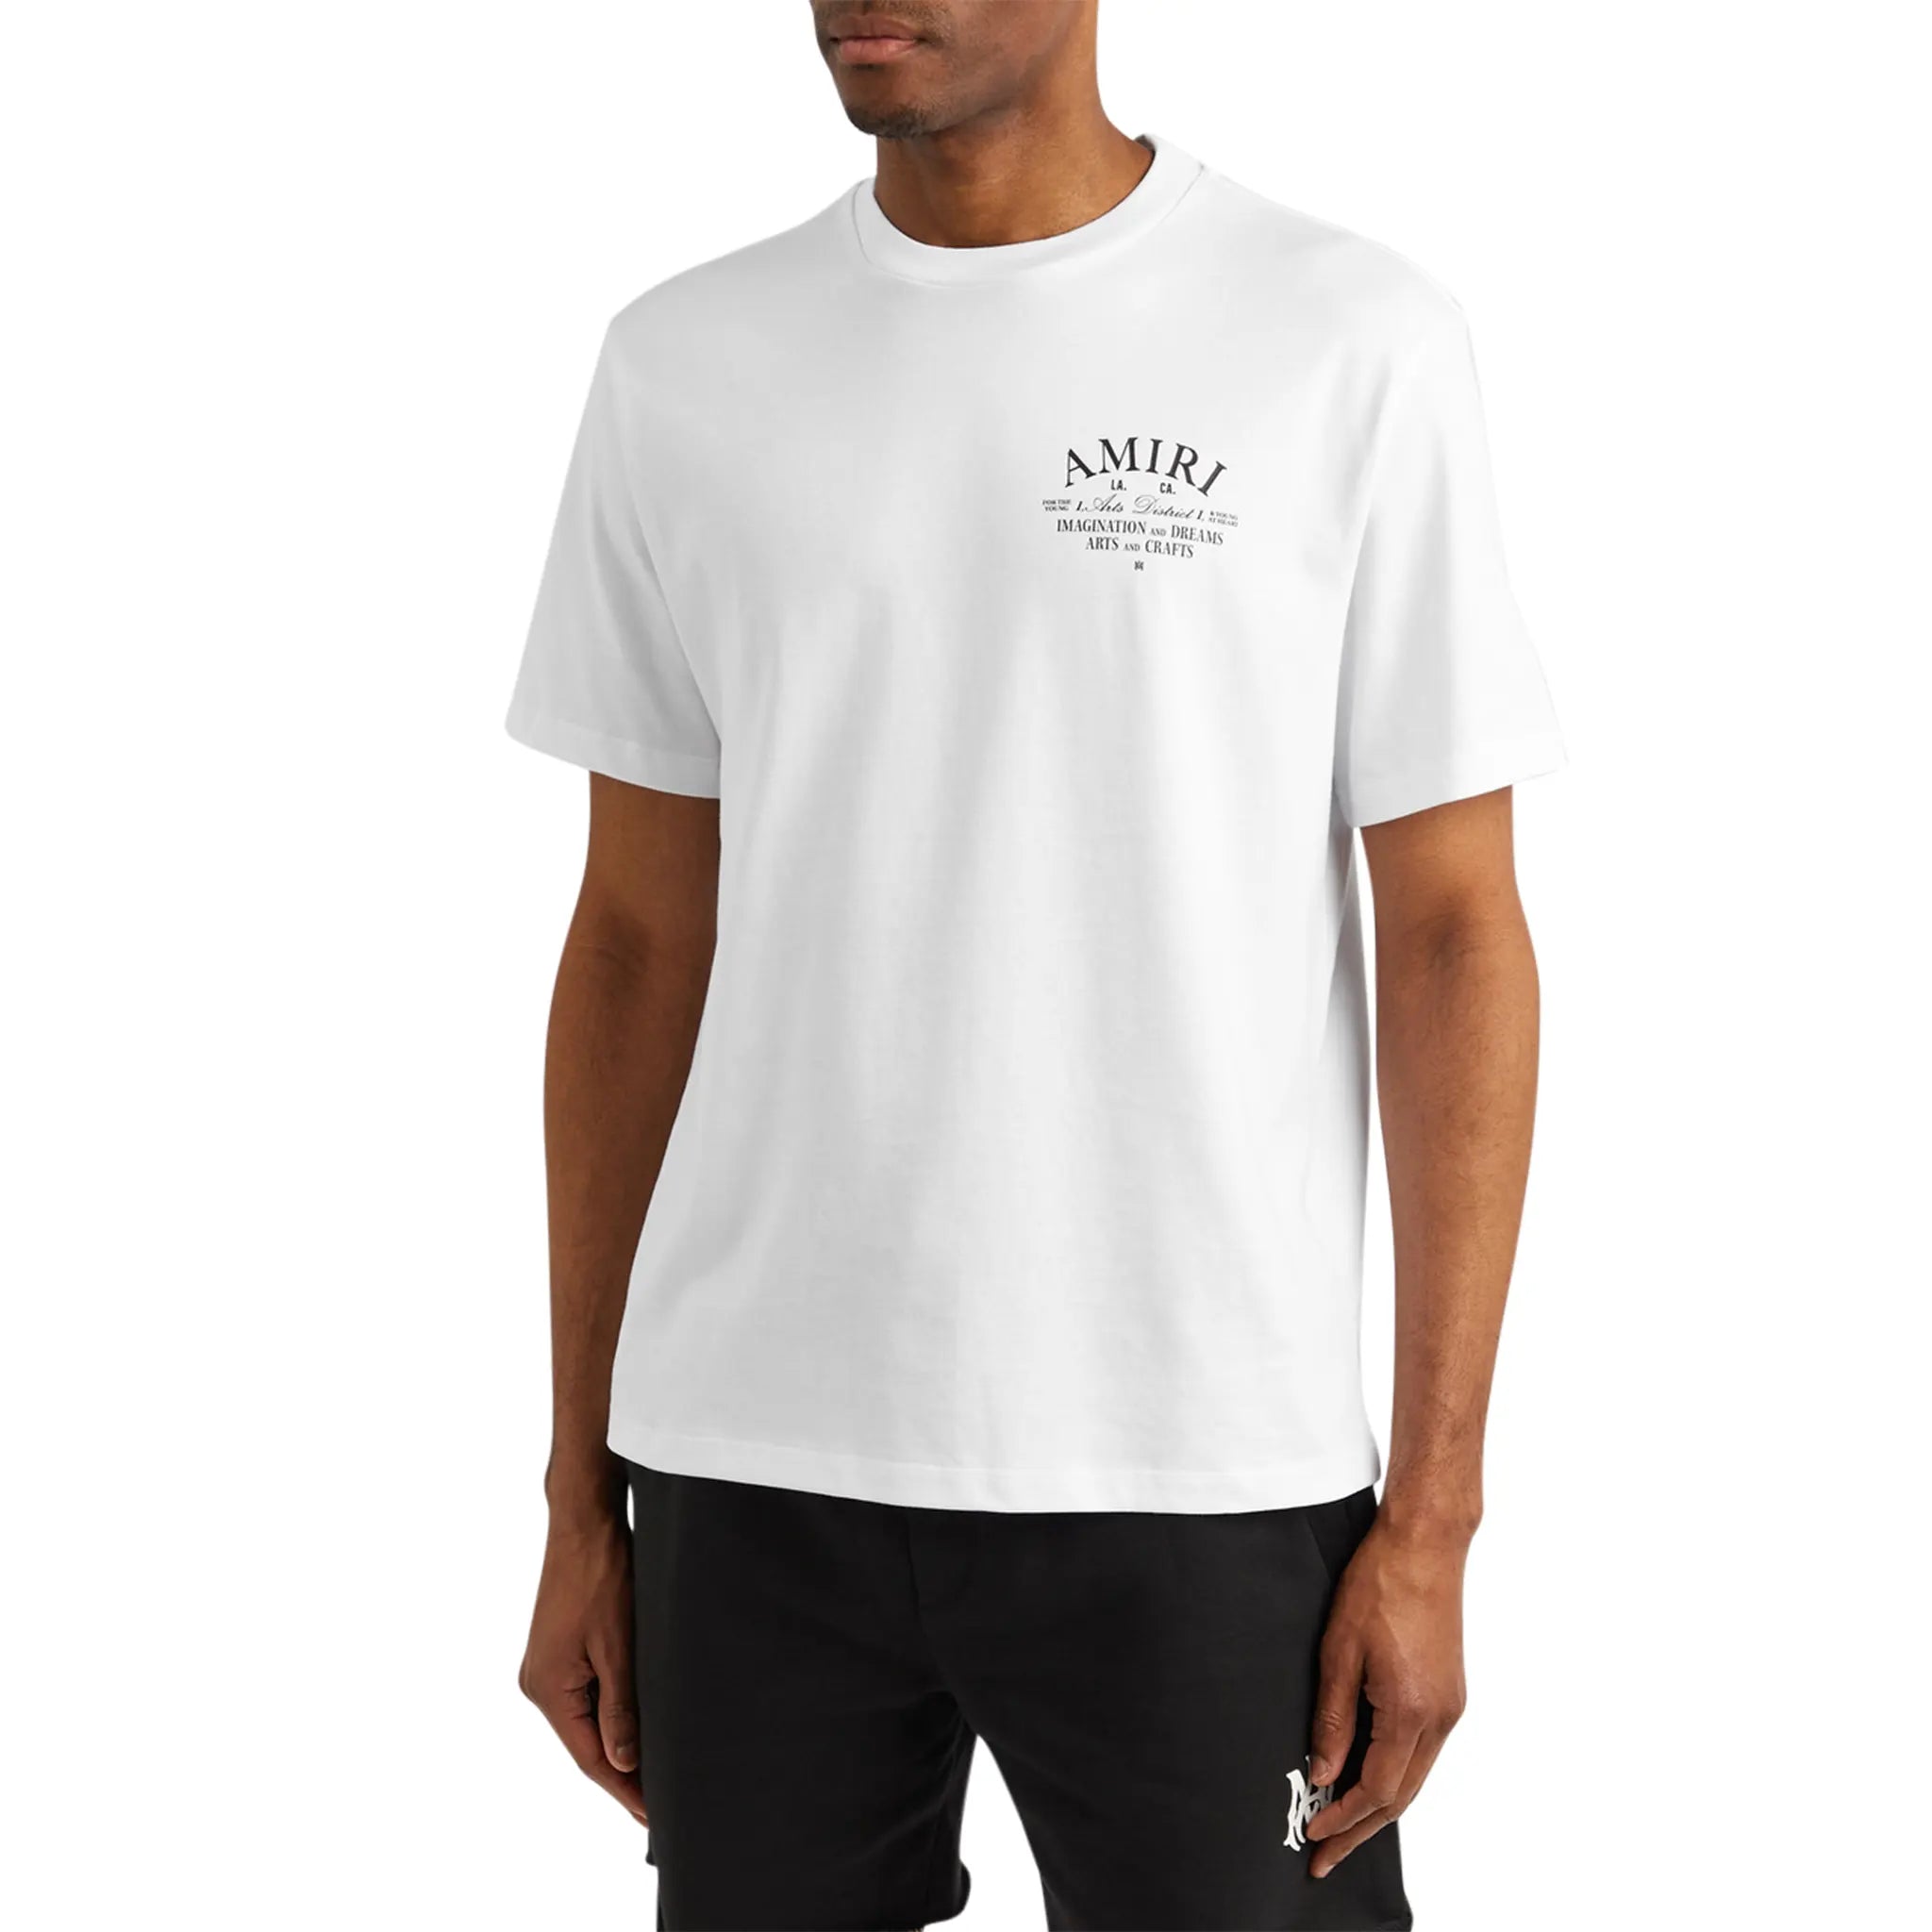 Model Front view of Amiri Arts District White T Shirt pxmjt001-100